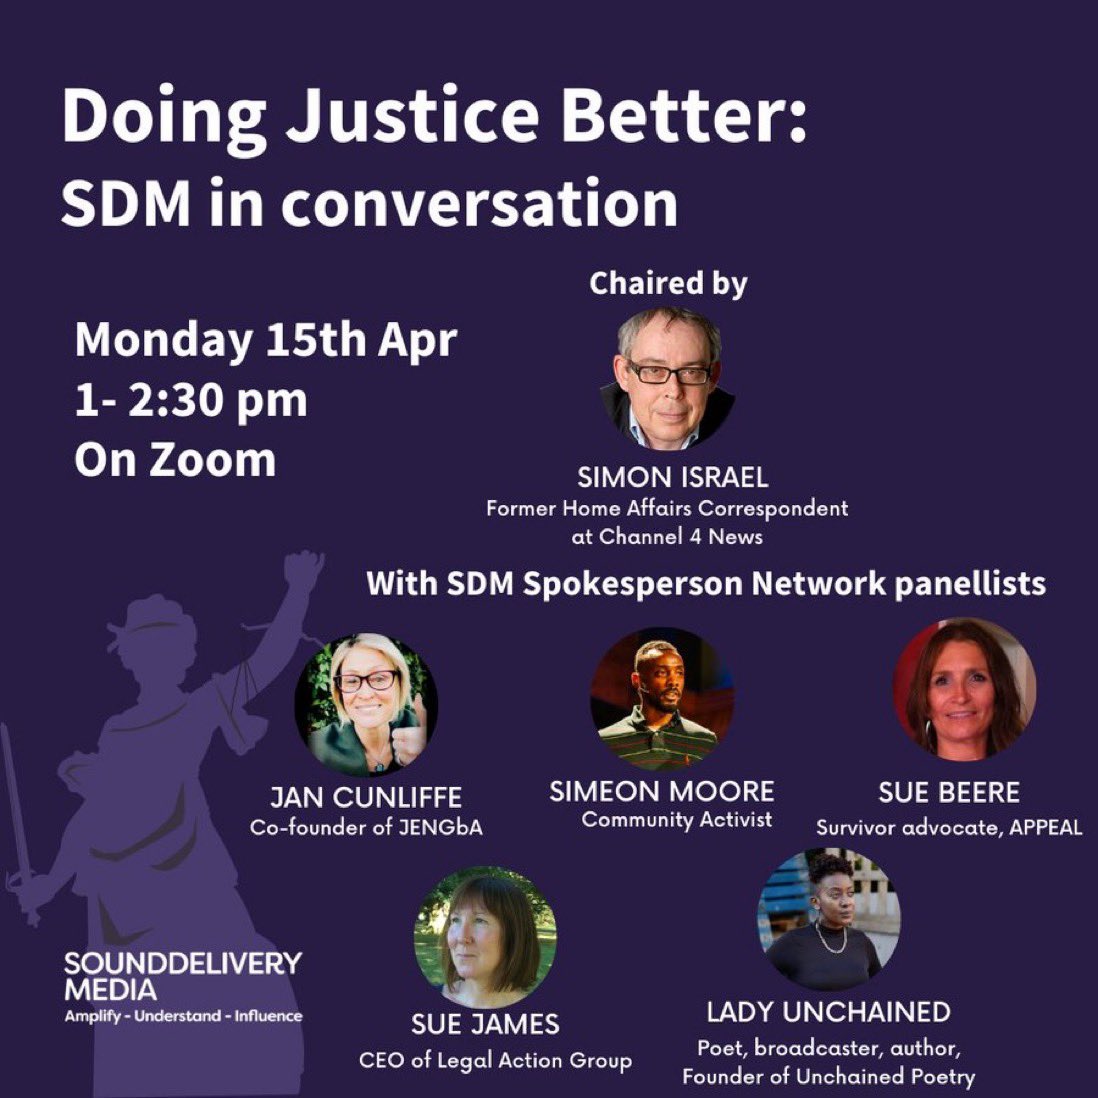 Justice Matters ⚖️ Looking forward to chatting with these incredible bunch of people tomorrow lunchtime. Grab your sandwich early & tune in at 1pm Monday. #SDMNetwork, @SueyBeere, @Jliffe, @UnchainedP, @zimbosla and event chair @simonisrael. sounddelivery.org.uk/our-events/doi…